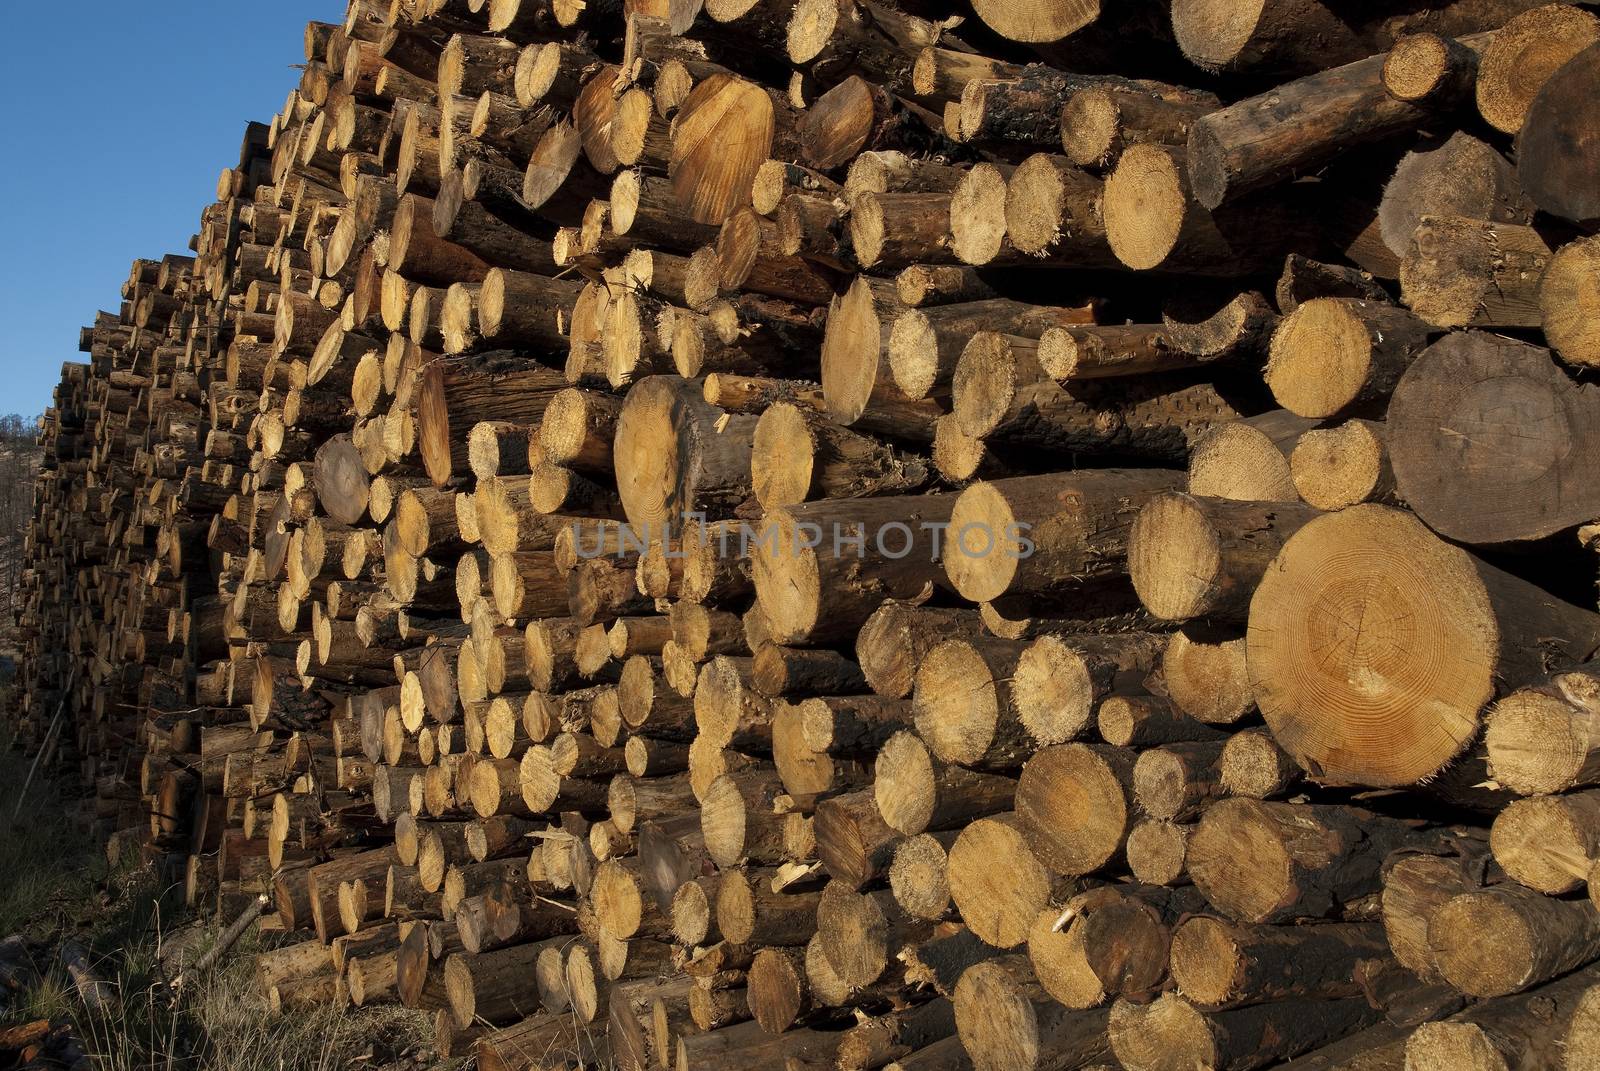 Pine wood collected after the fire, Guadalajara, Spain  by jalonsohu@gmail.com